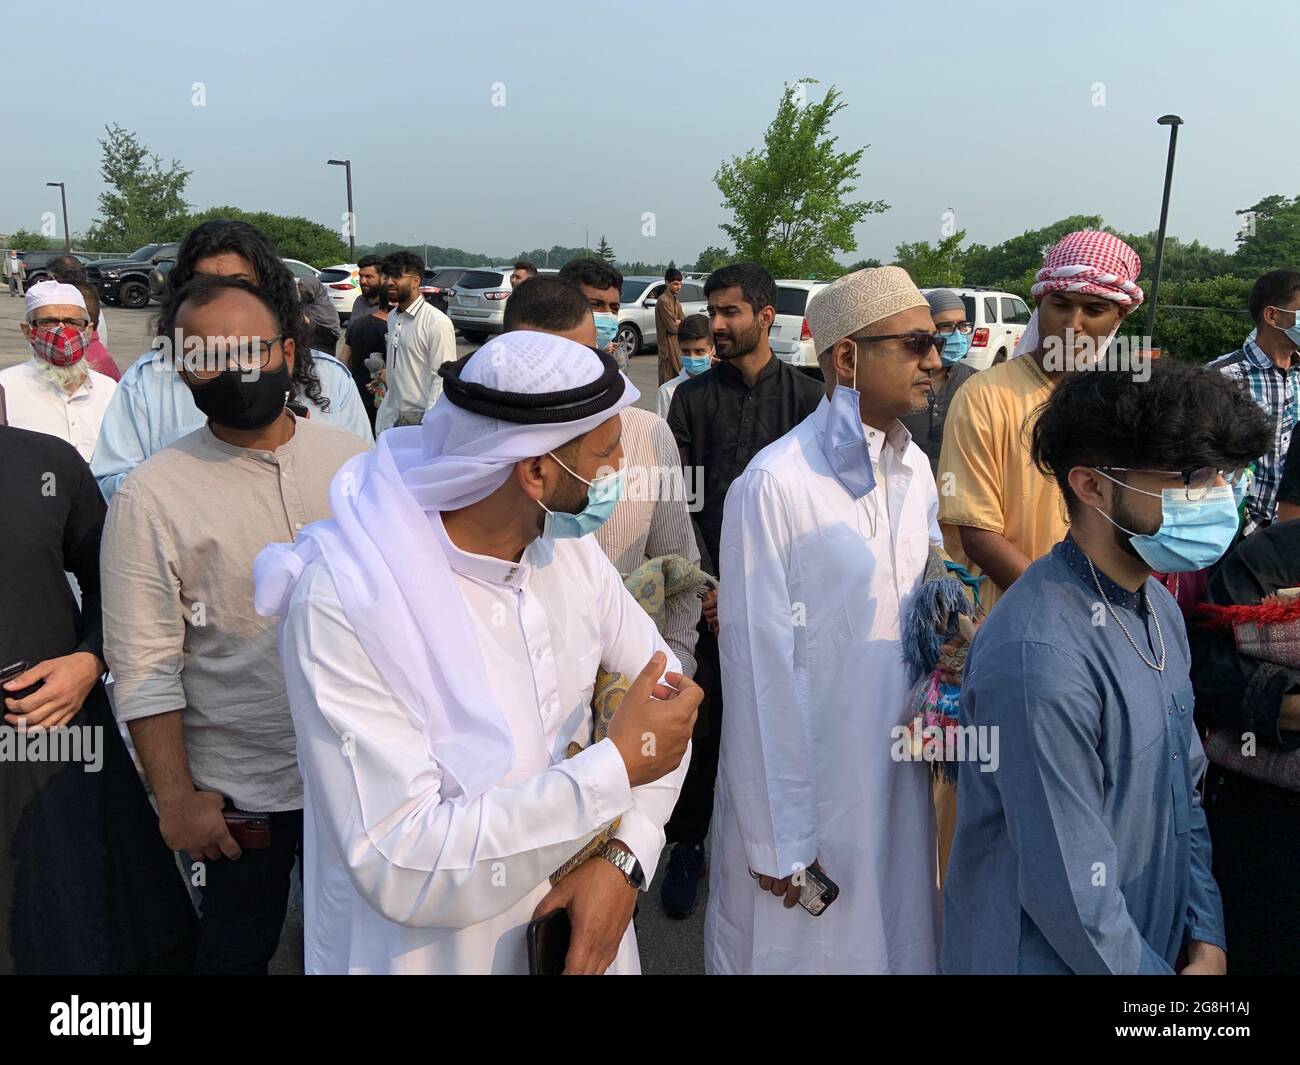 A crowd Muslim worshippers gather outdoor at the mosque to worship and celebrate Eid festival. Stock Photo